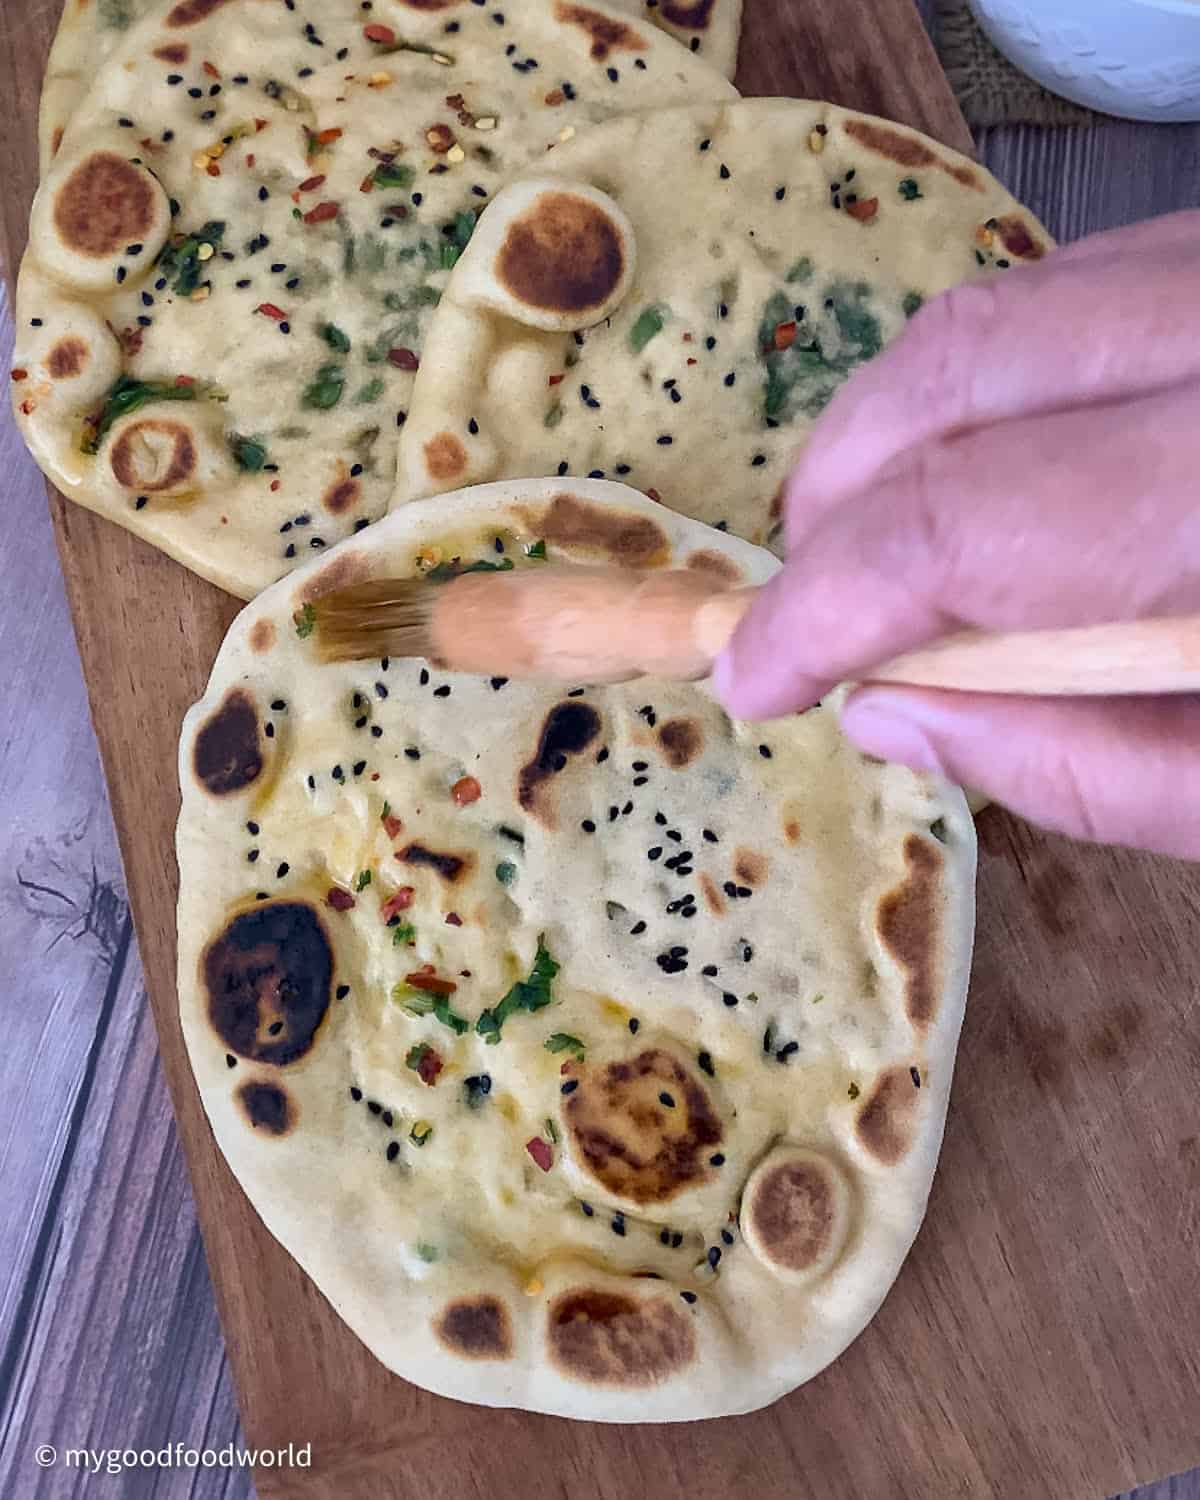 Ghee that has fresh herbs and red pepper flakes in it is being applied on a well roasted naan bread with a wooden brush.